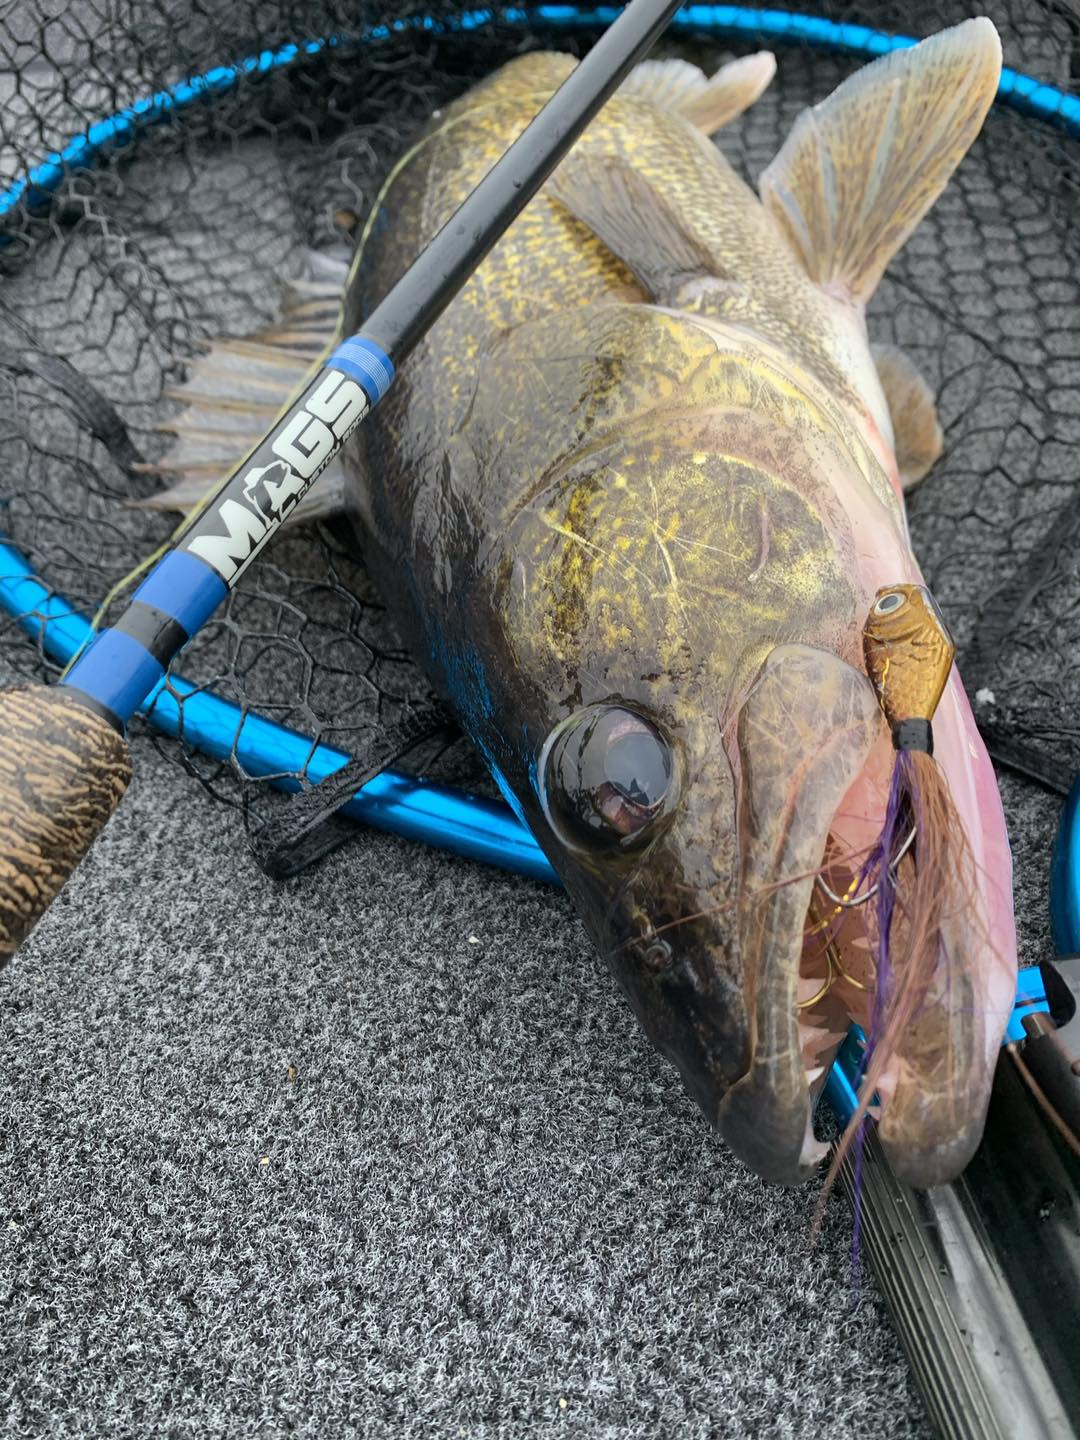 When walleye fishing, the jig is up